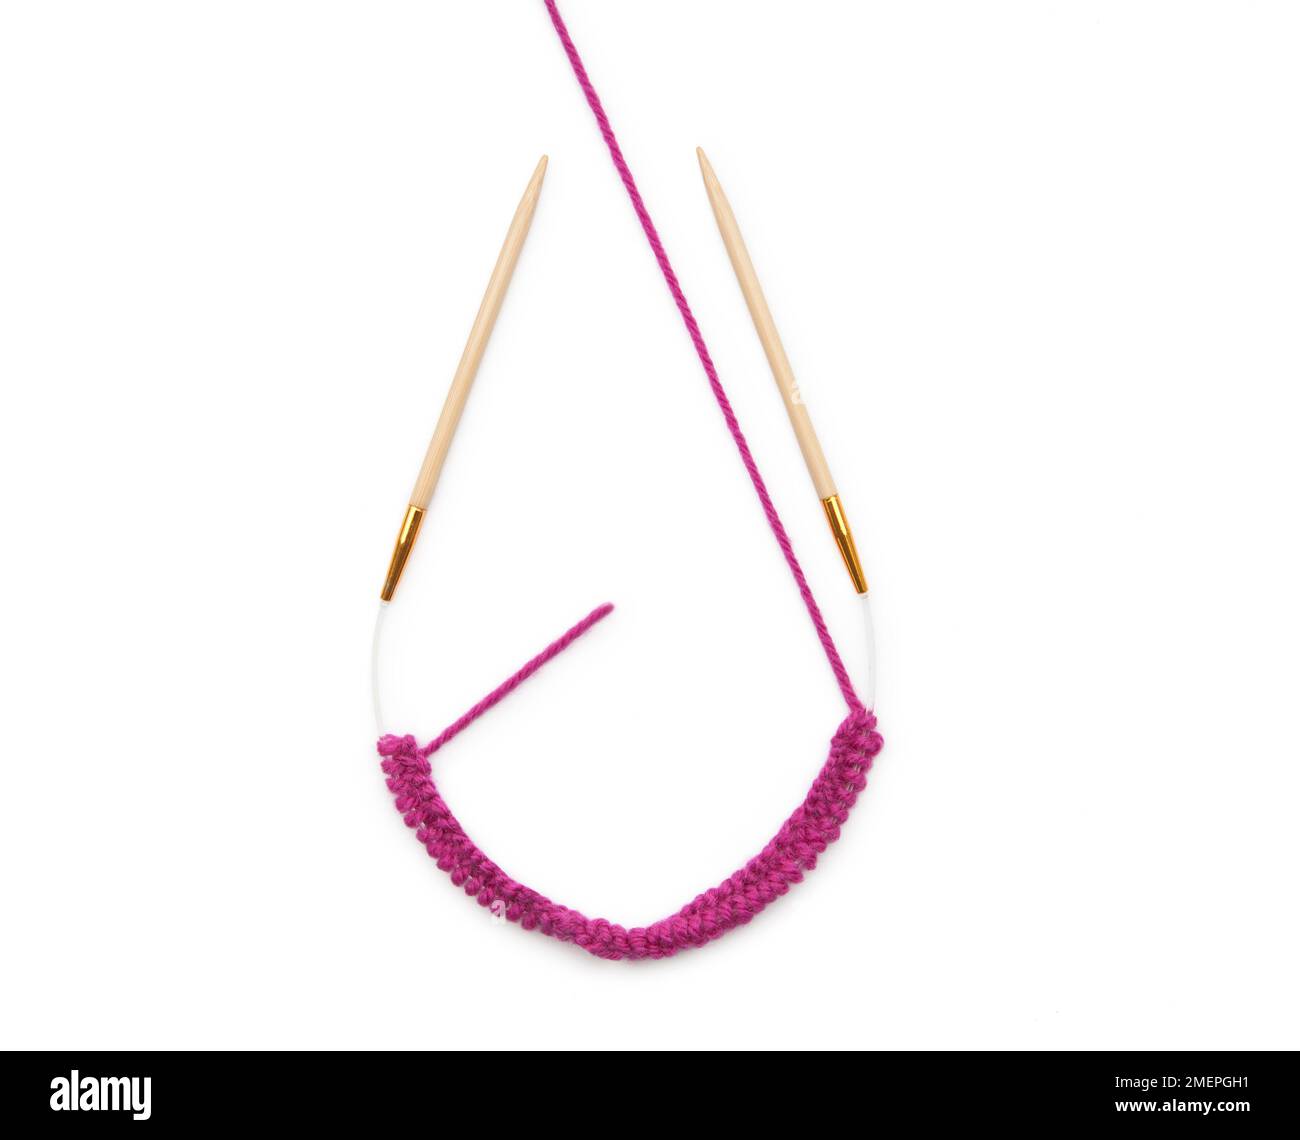 Example of working with a circular knitting needle - knitting a mobus loop Stock Photo